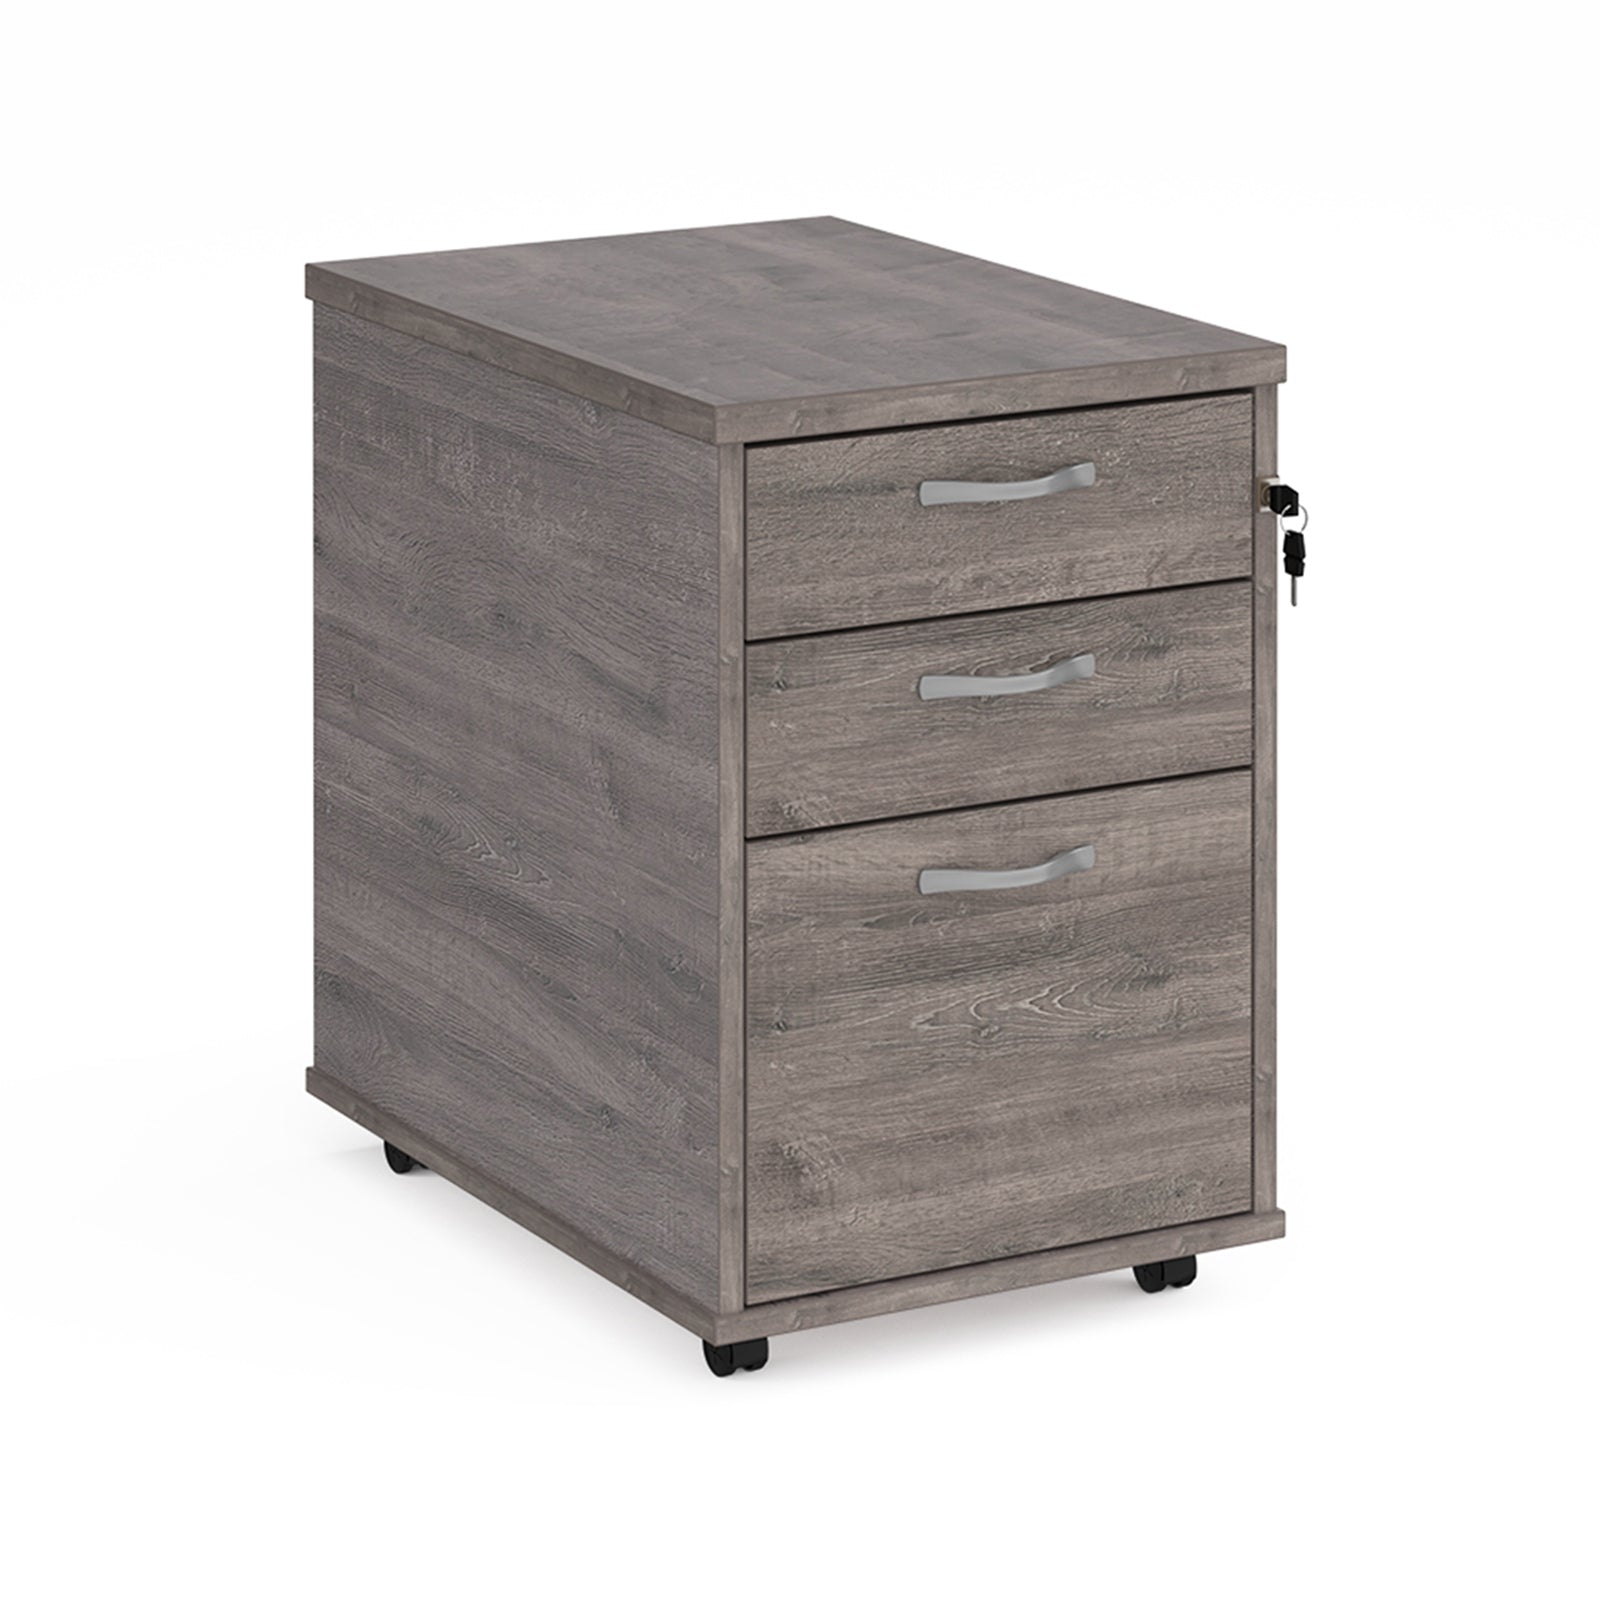 Universal Three Drawer Tall Mobile Pedestal - 426mm Wide